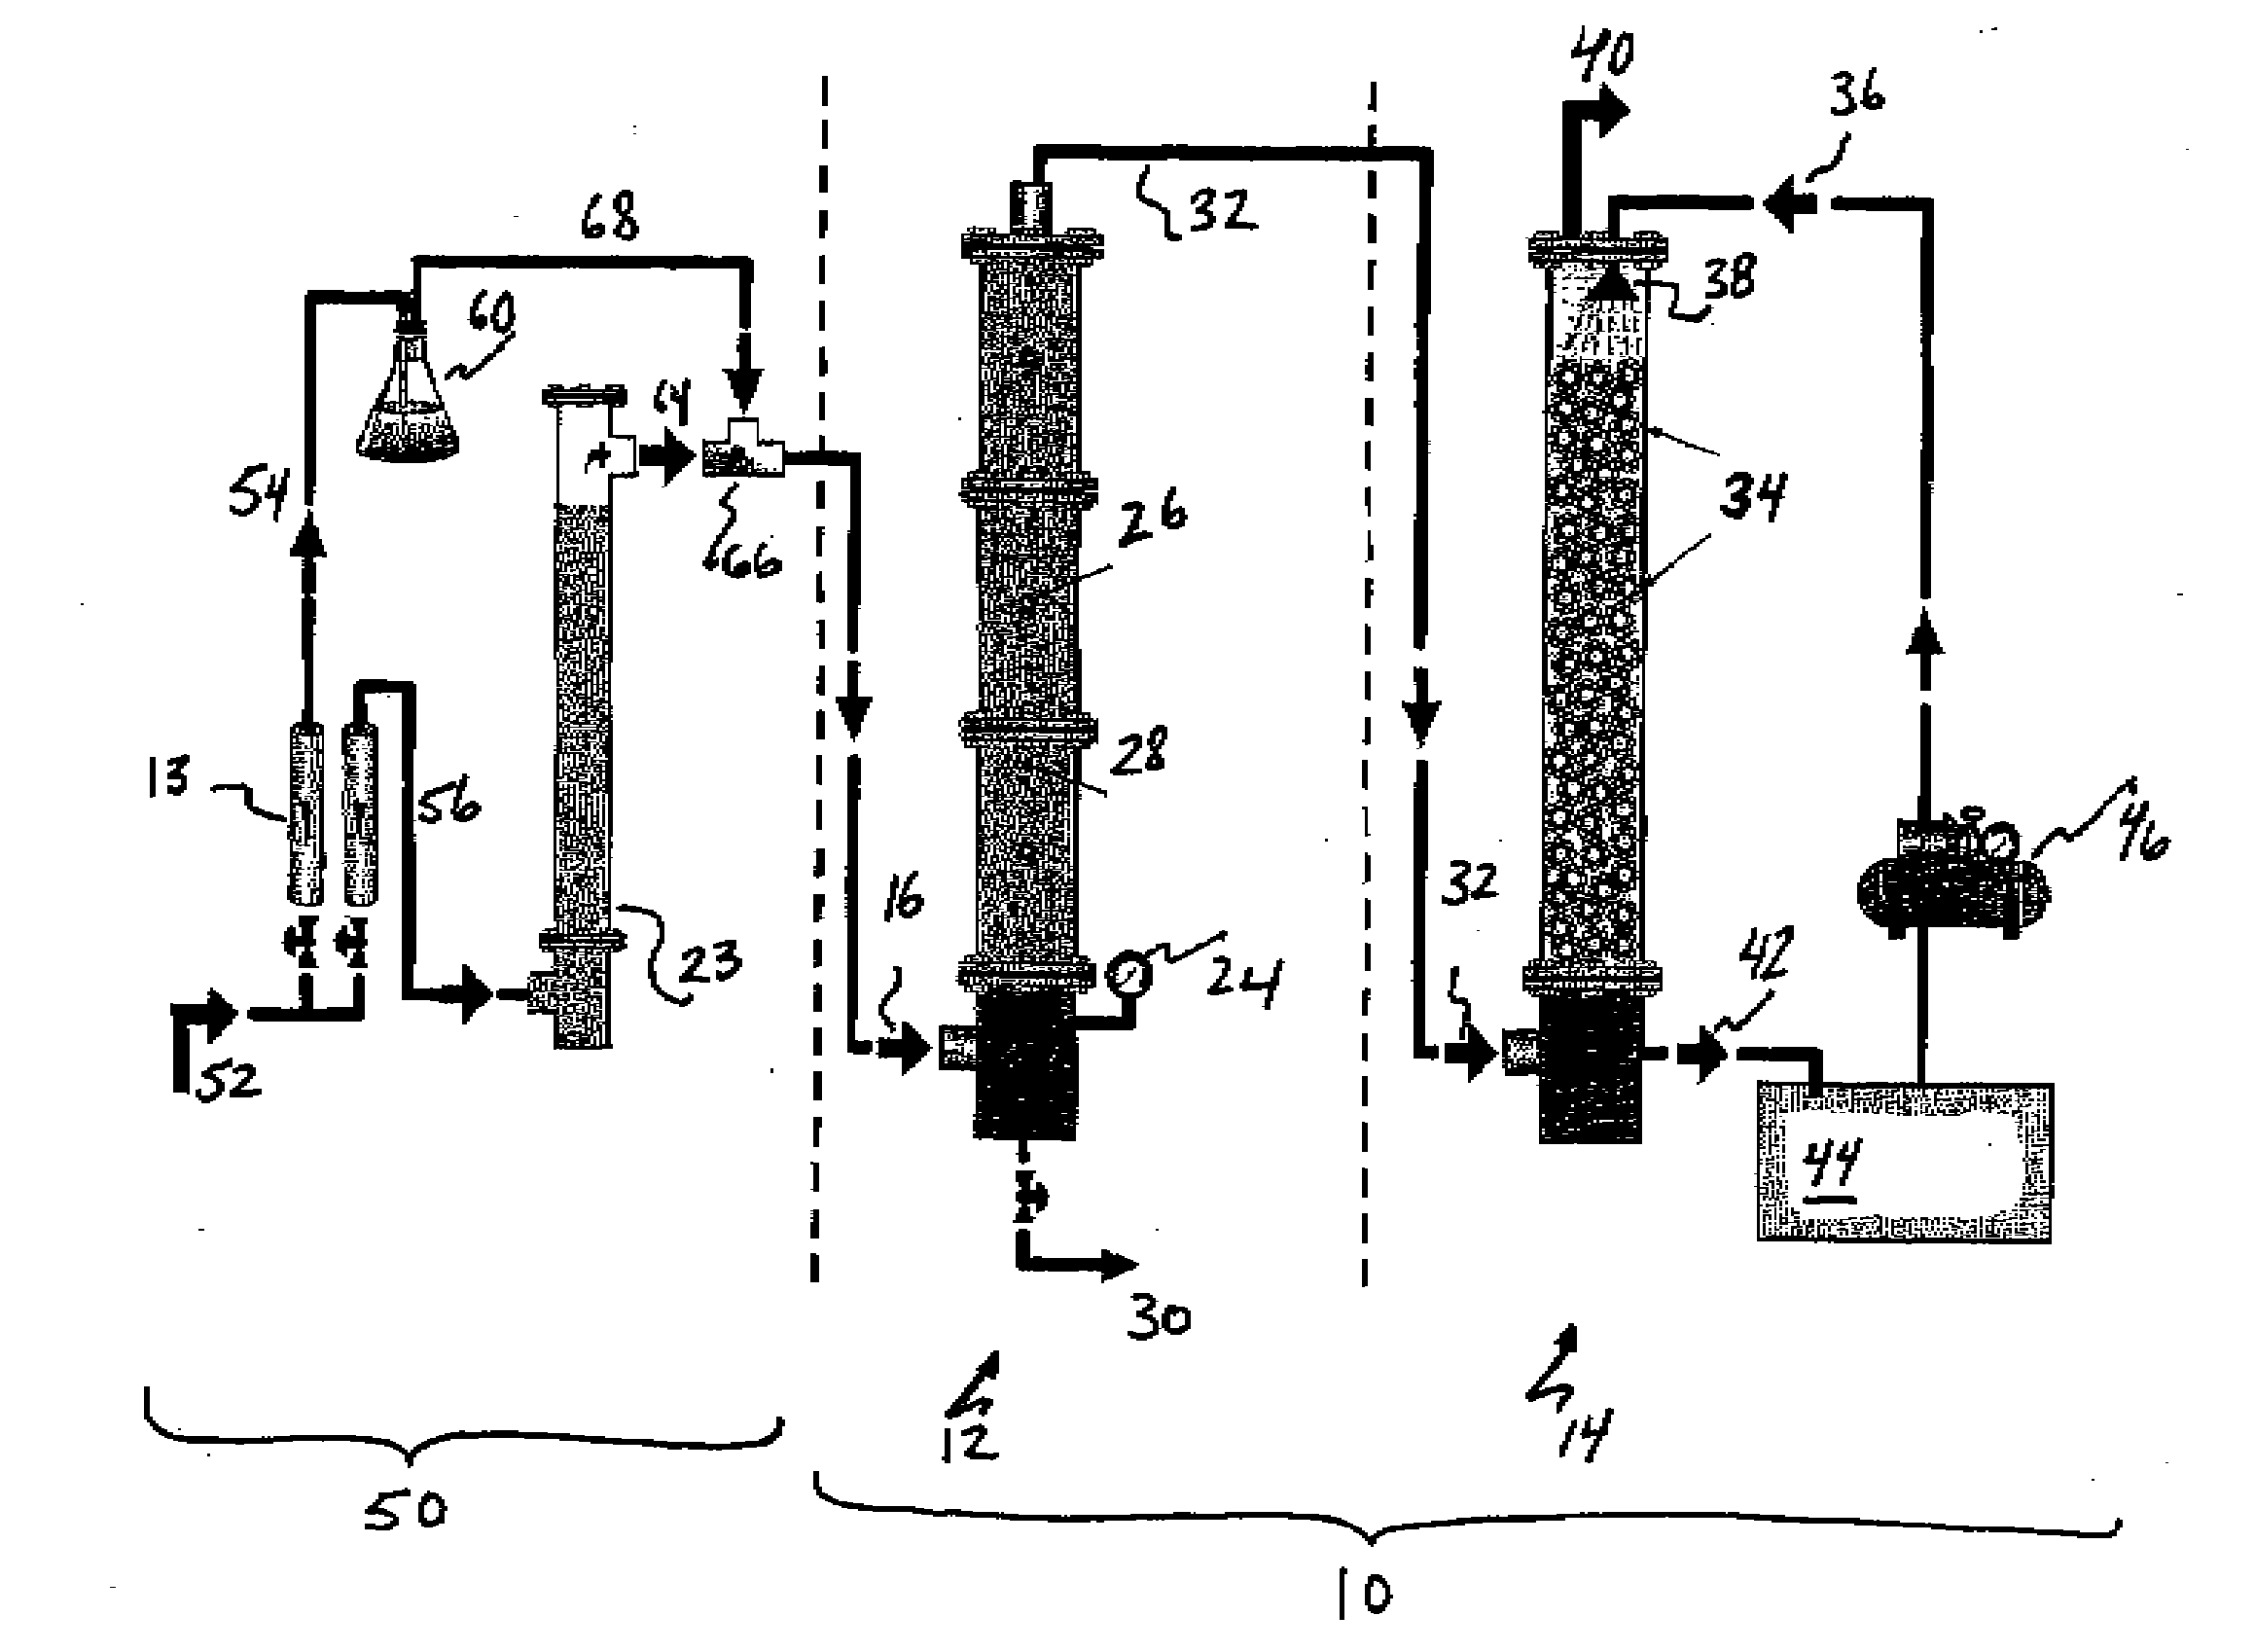 Gas purification apparatus and process using biofiltration and enzymatic reactions